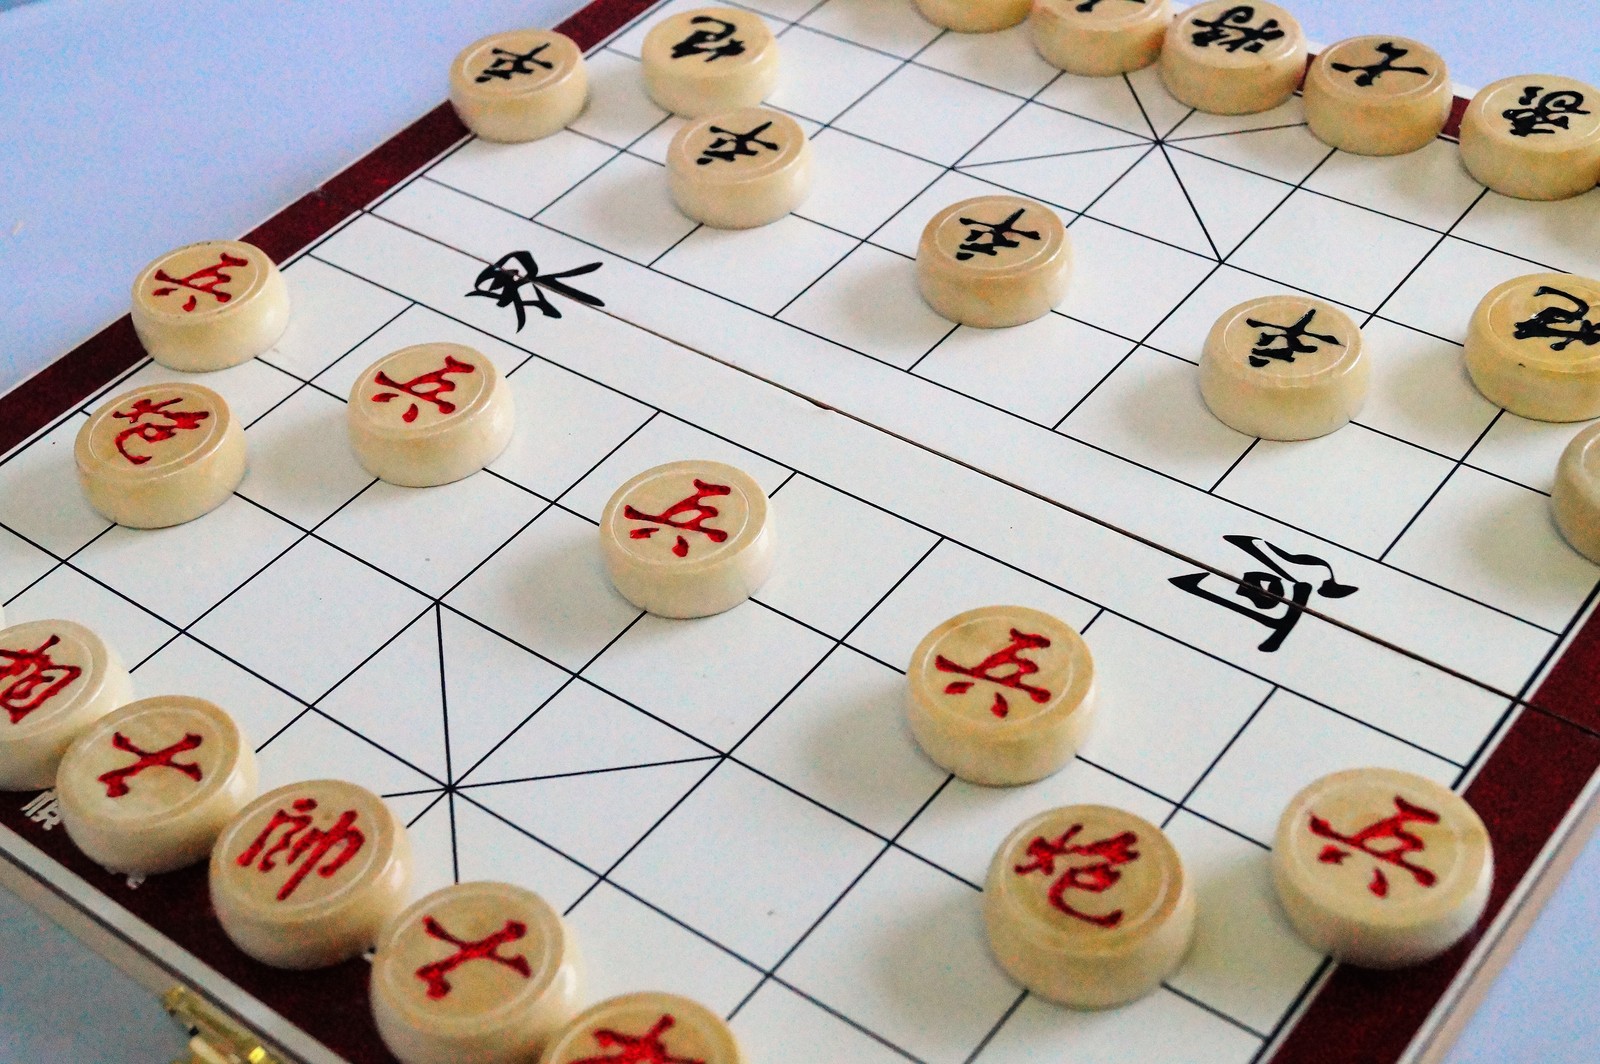 Have you play the “Chinese Chess” before?